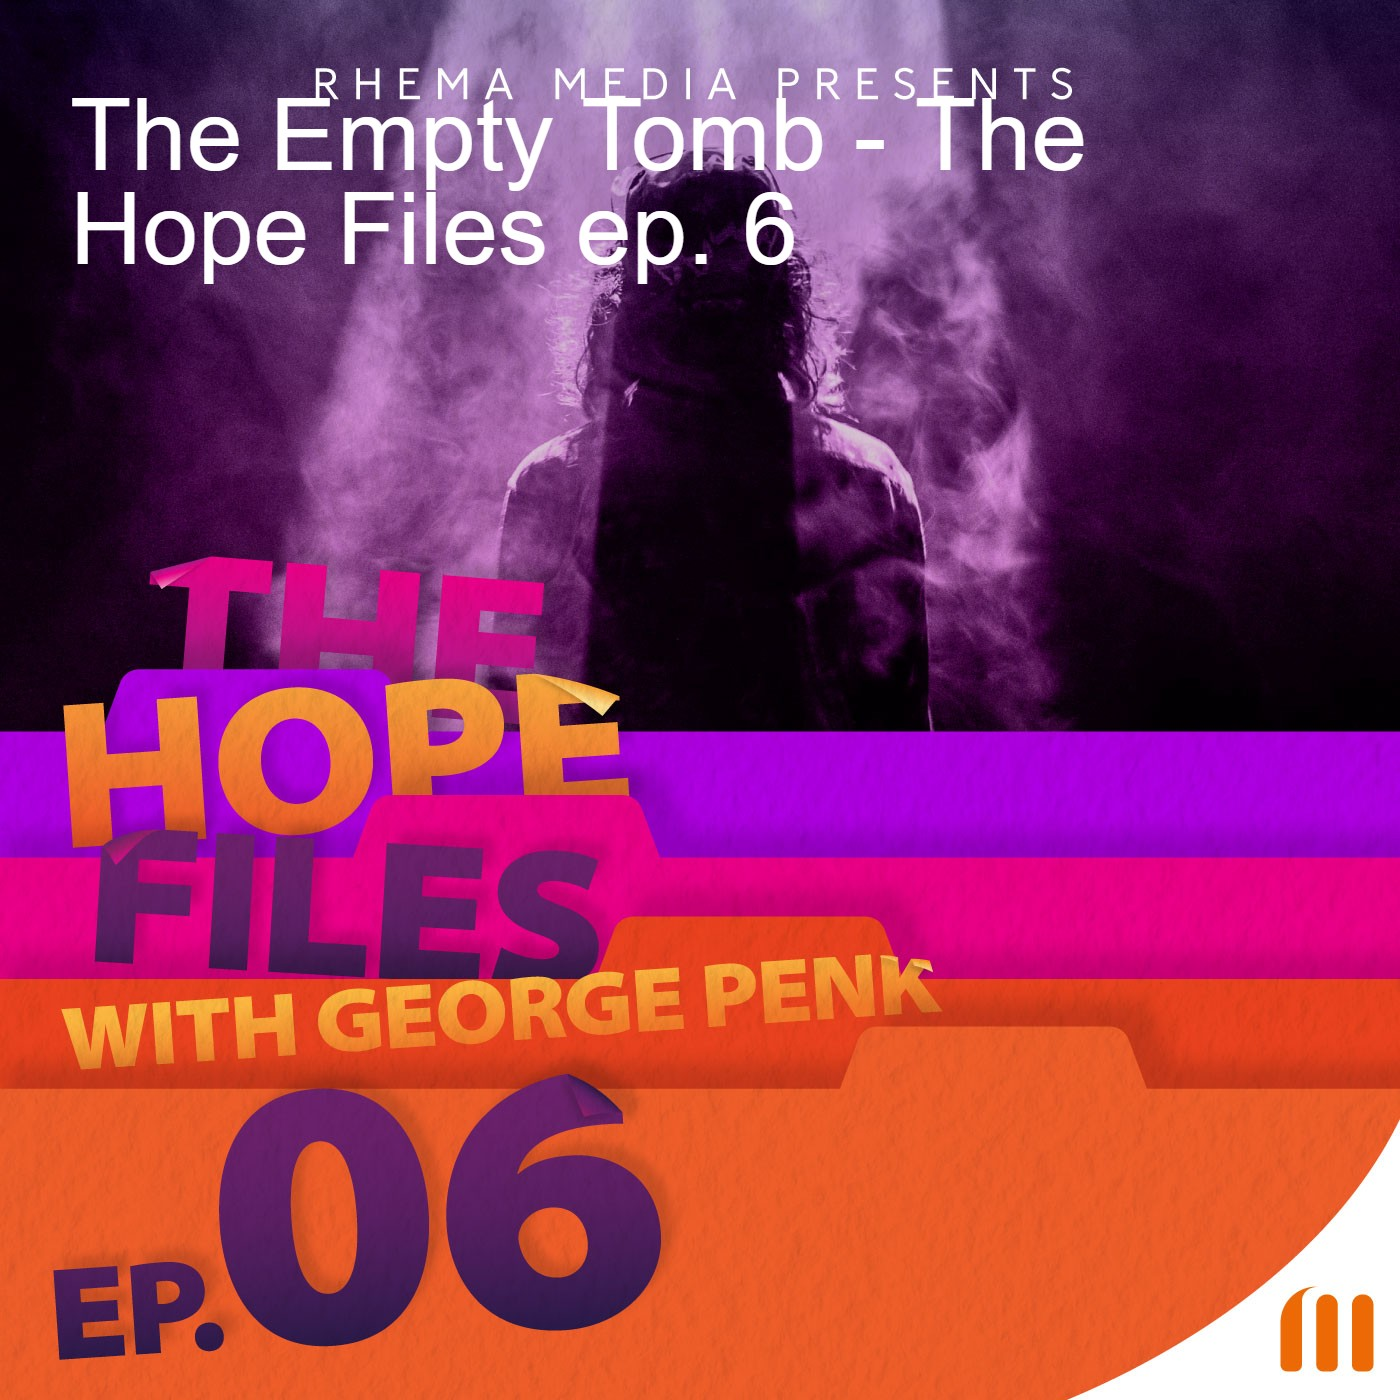 The Empty Tomb - The Hope Files ep. 6